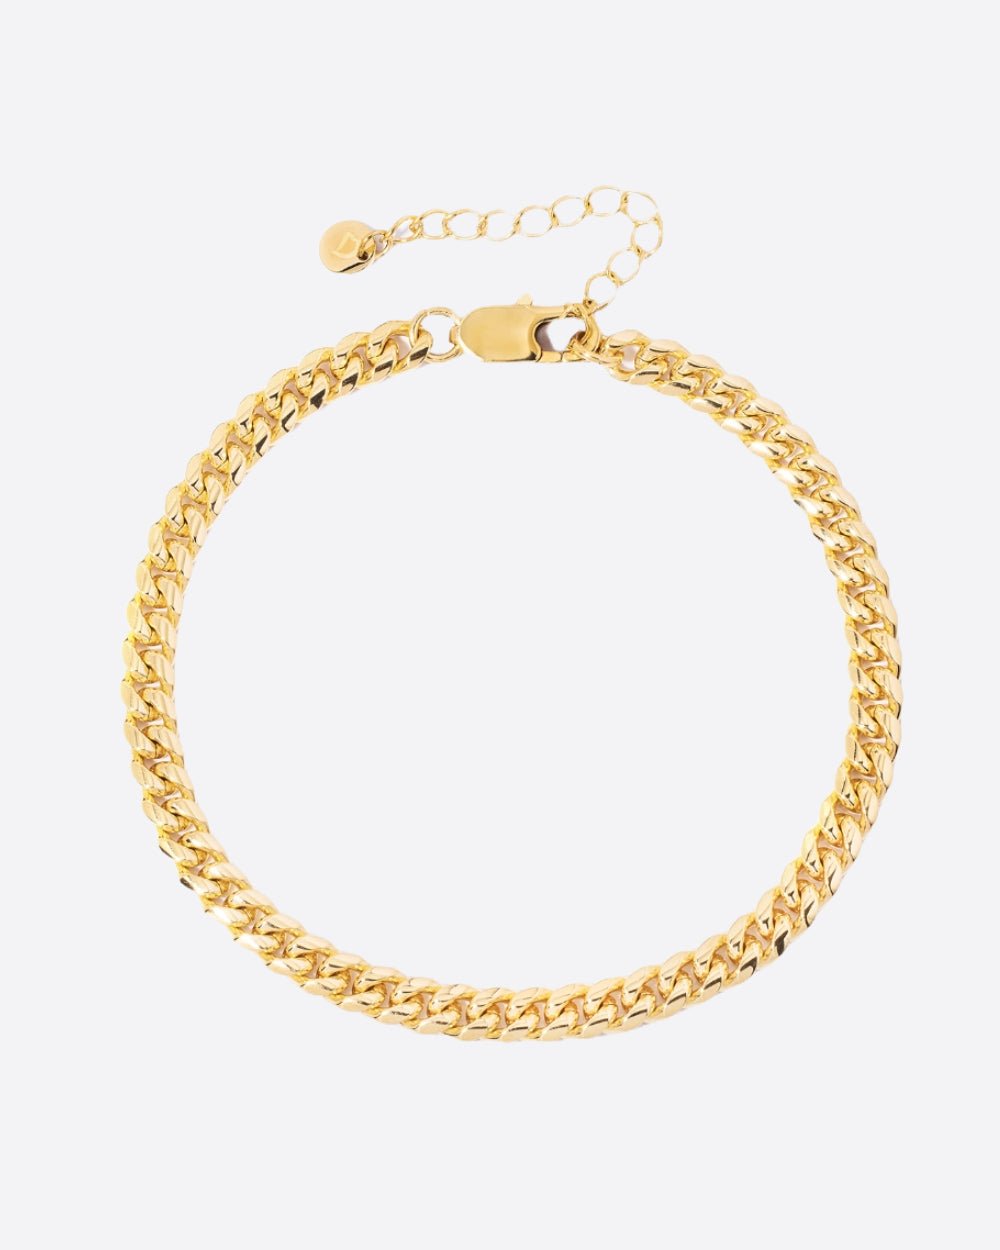 CLEAN CUBAN ANKLET. - 6MM 18K GOLD - Drippy Amsterdam